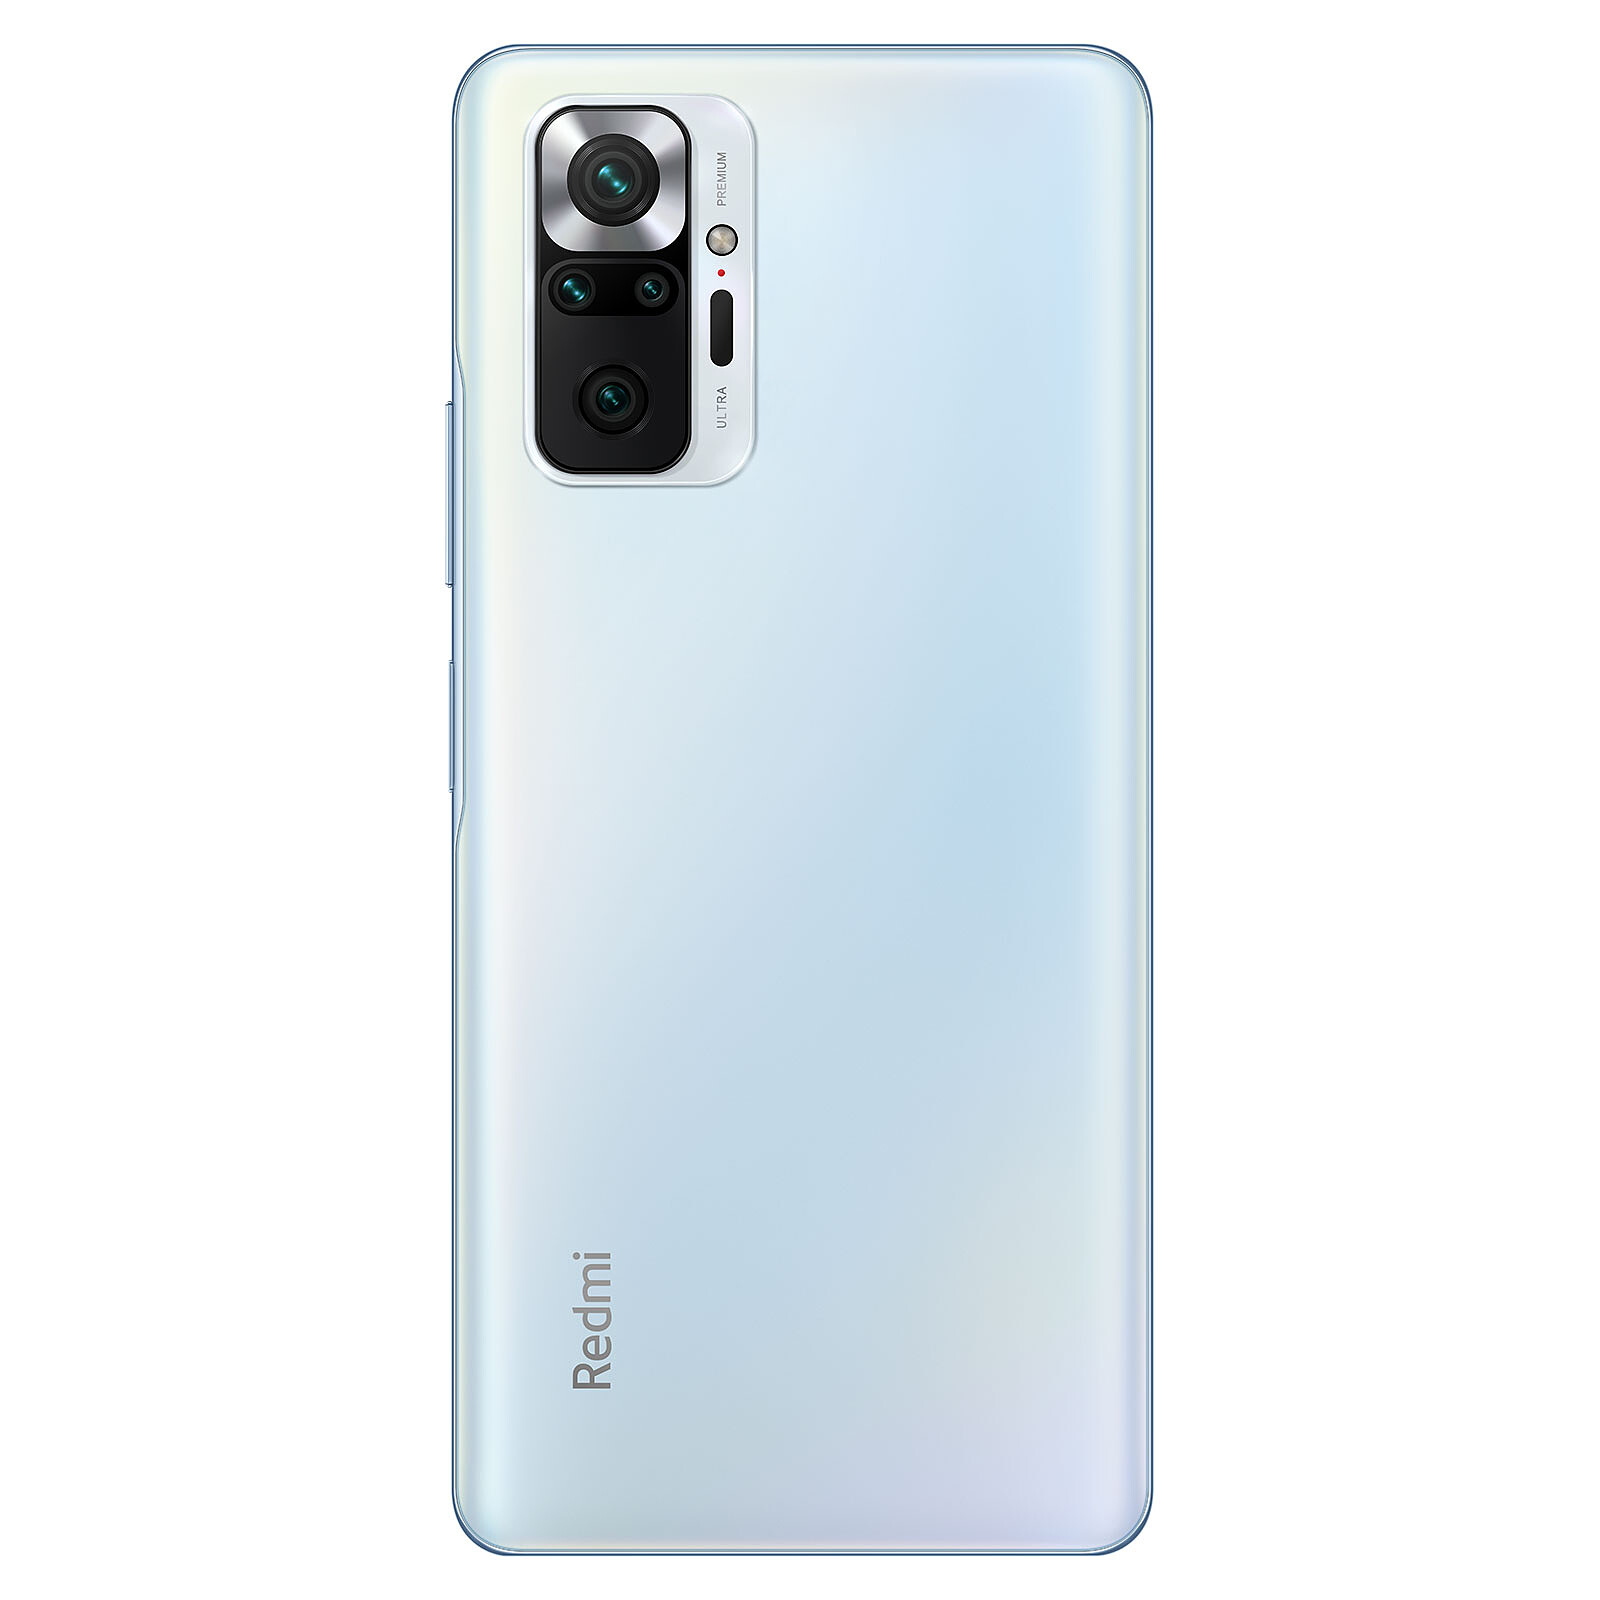 Xiaomi Redmi Note 10 Pro first take: 108MP camera, 120Hz display, and 5,020  mAh battery